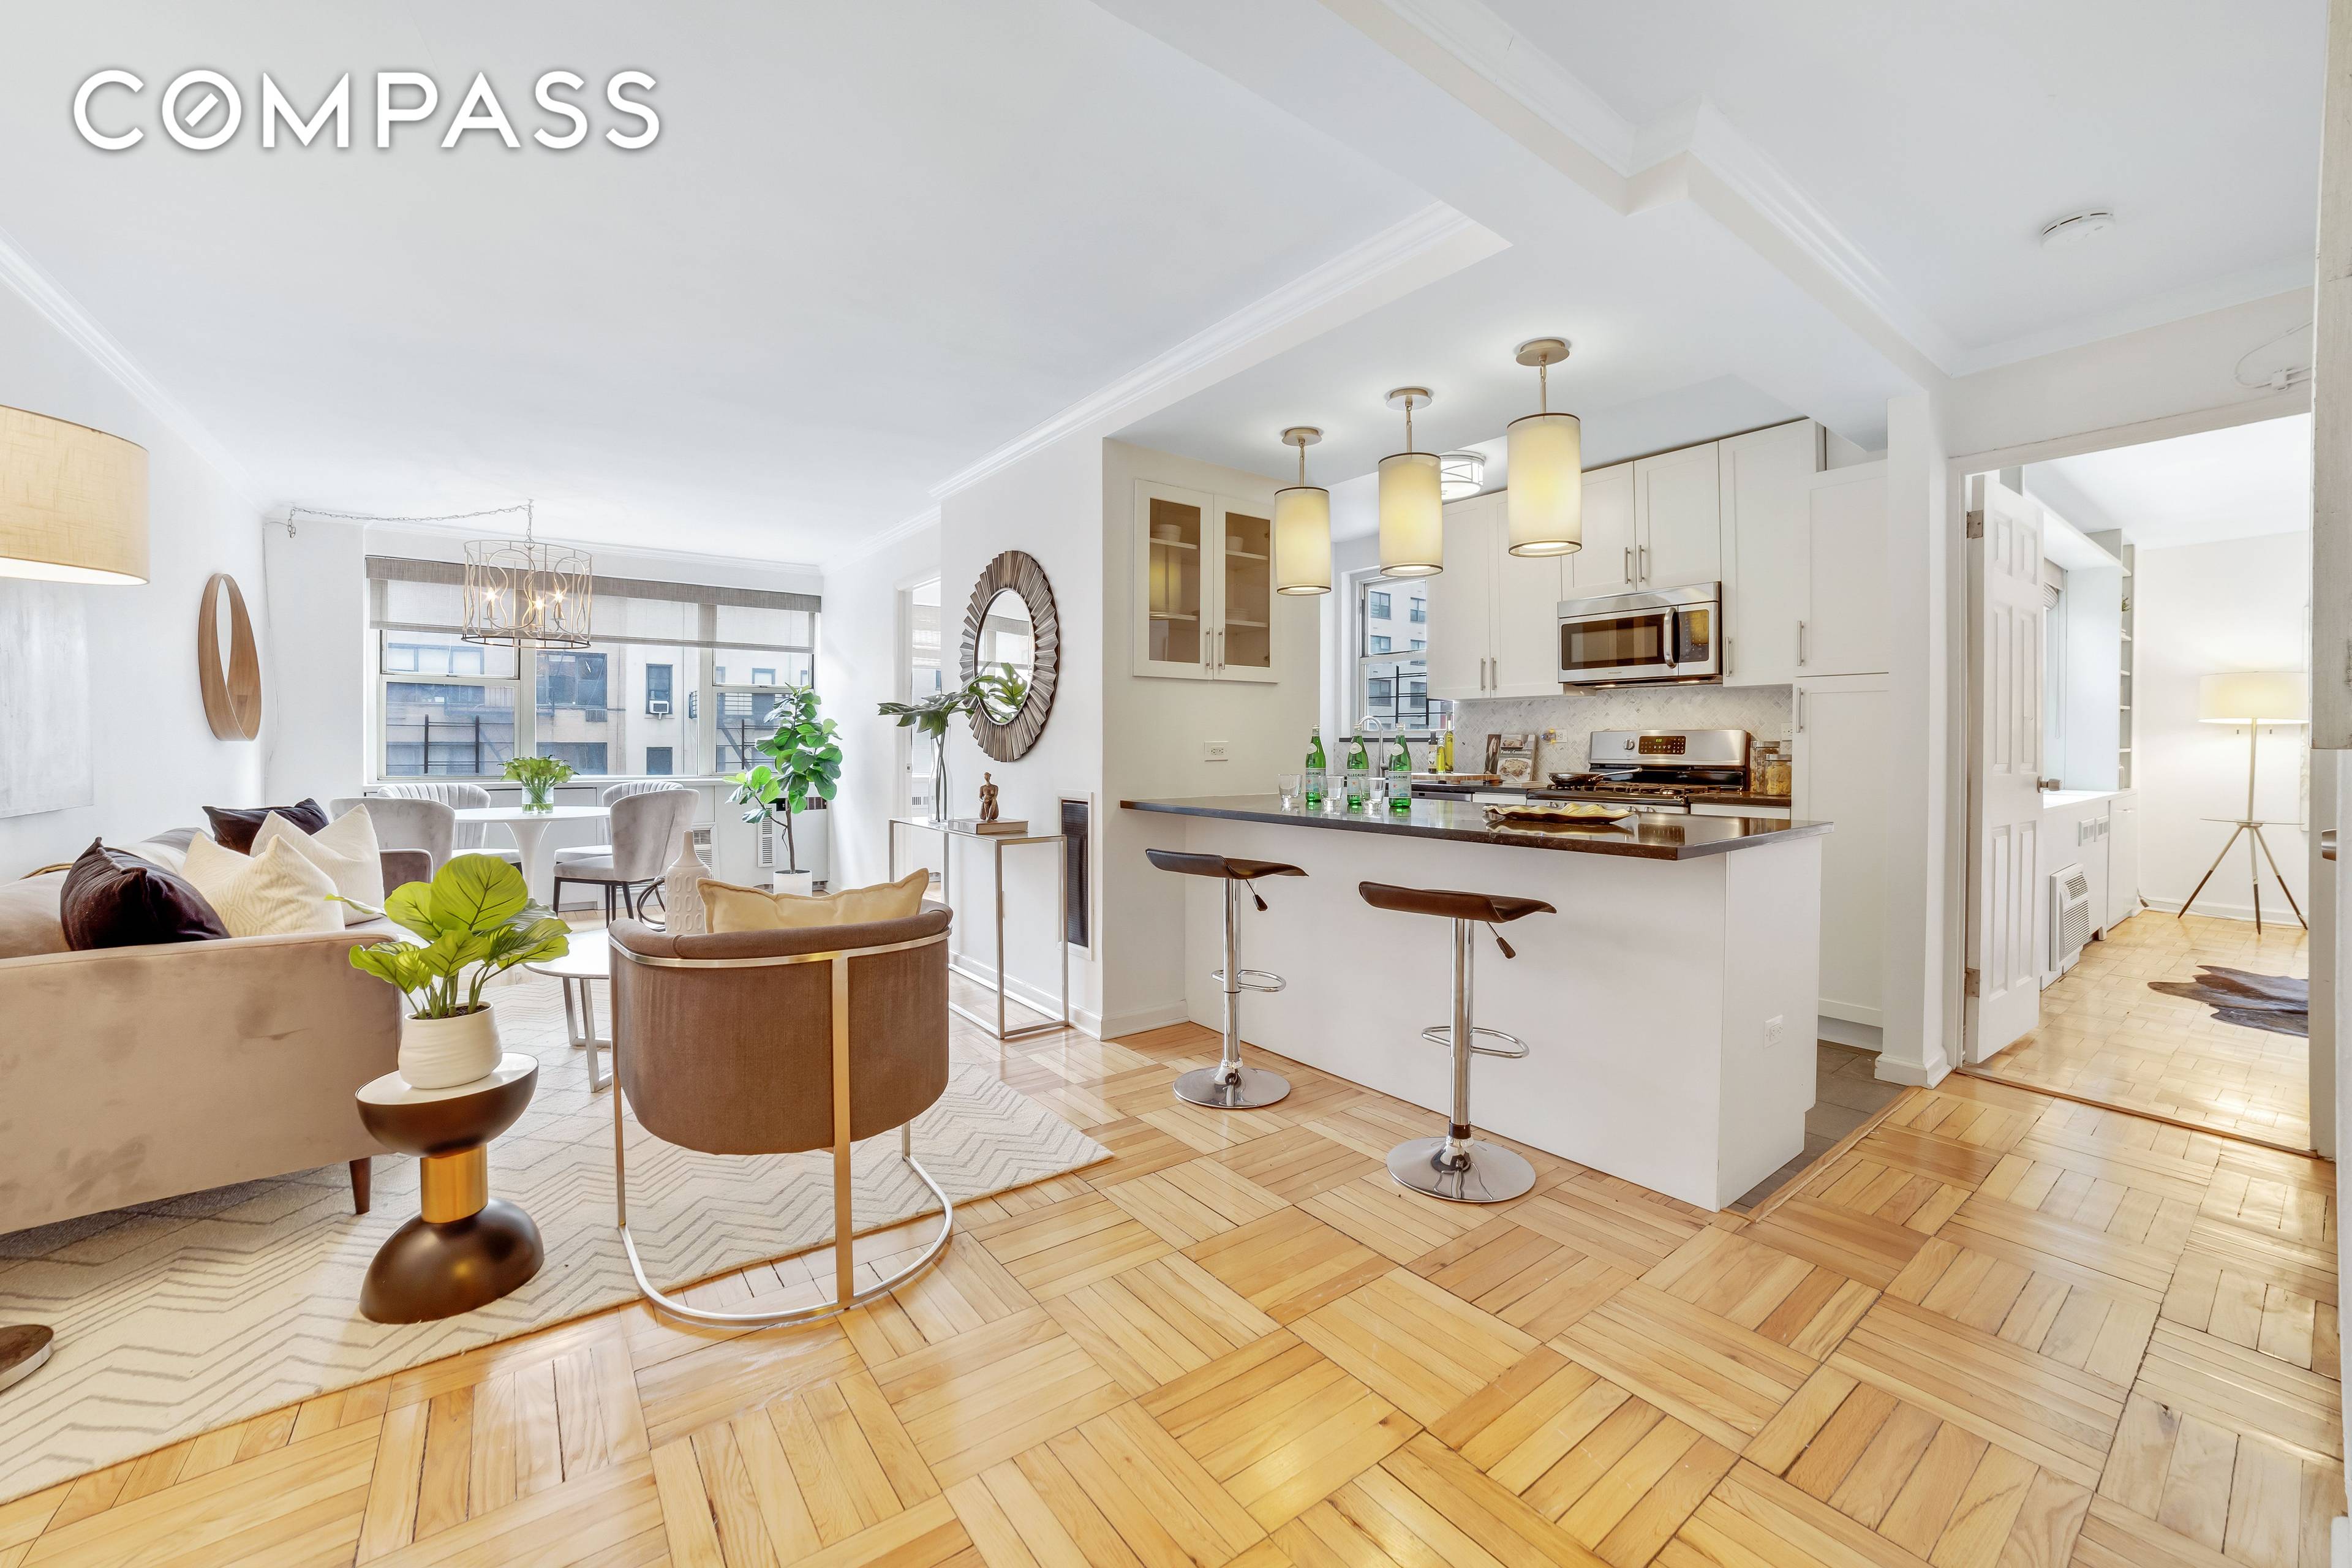 Welcome to your new home at 233 East 69th Street, an incredible building in the heart of the Upper East Side.